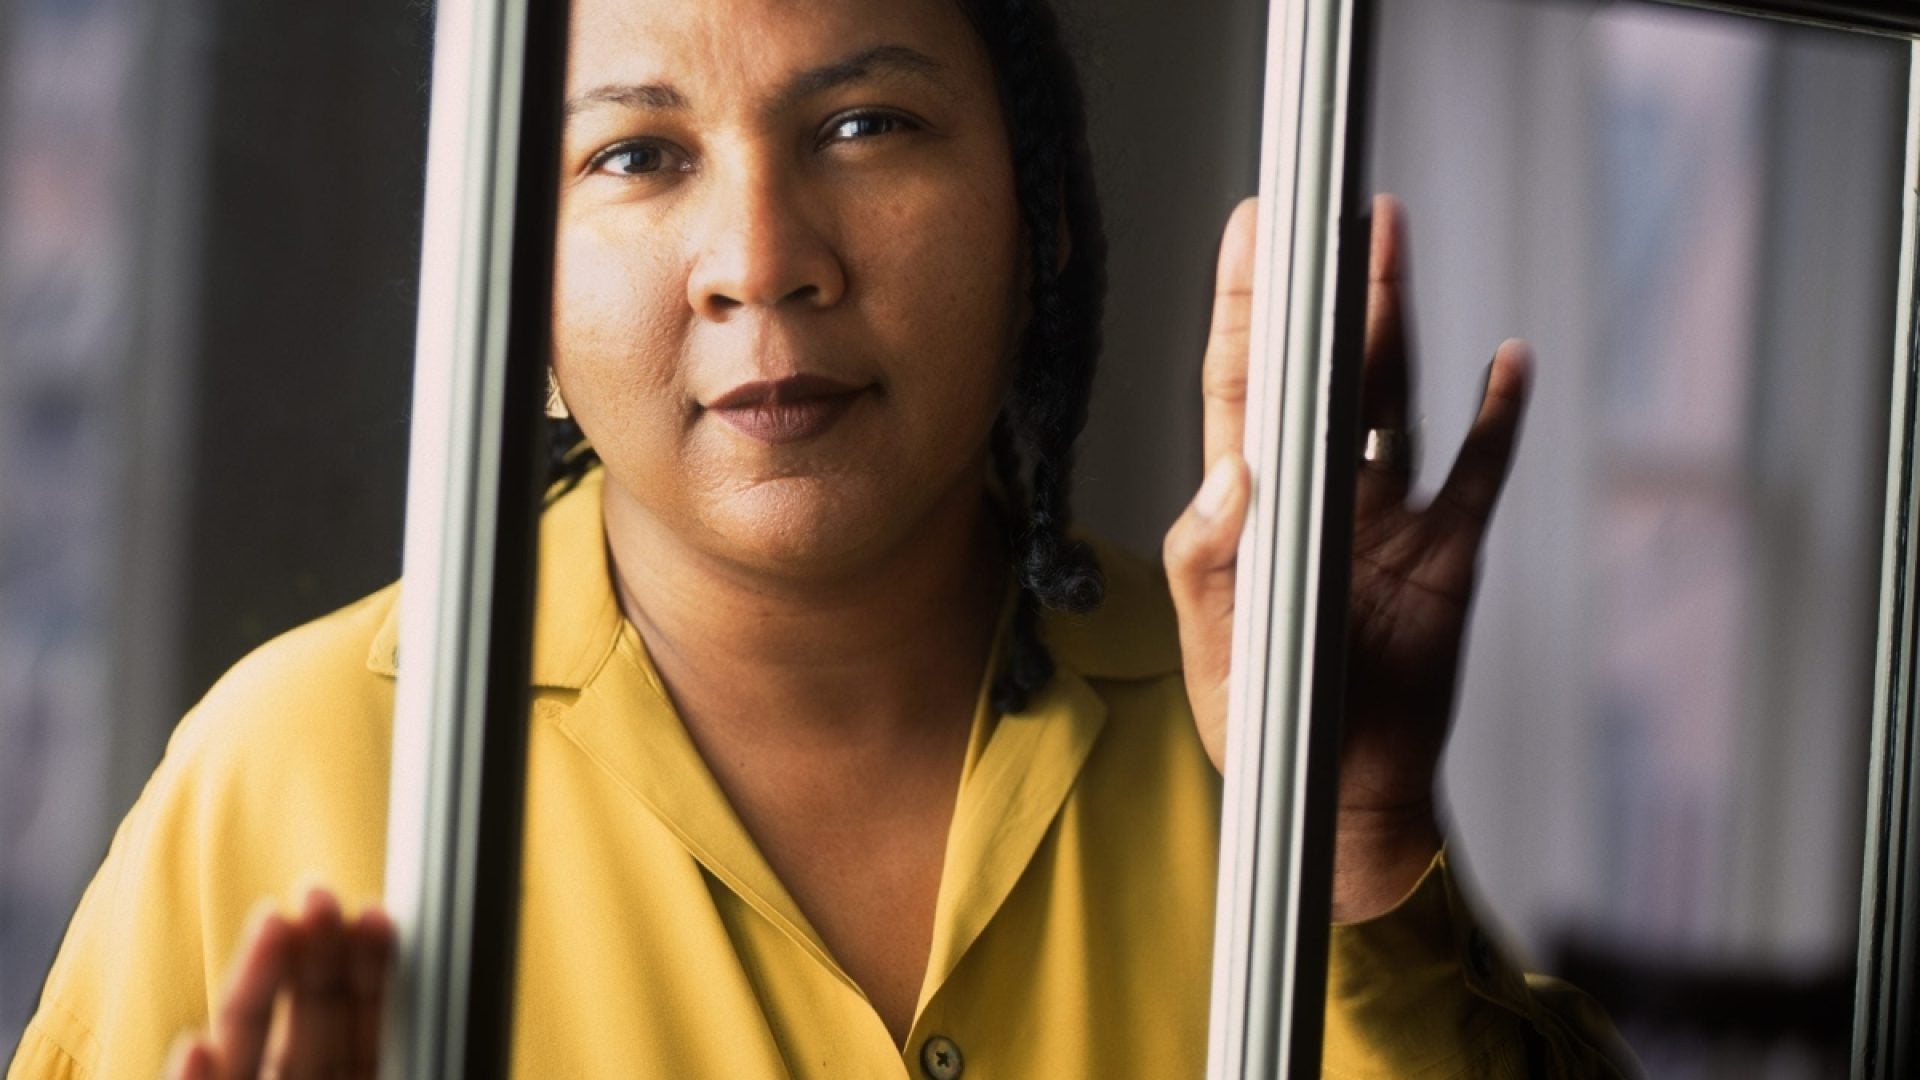 The Glory Of bell hooks Will Live Forever - Revisit Some Of Her Greatest Work Here